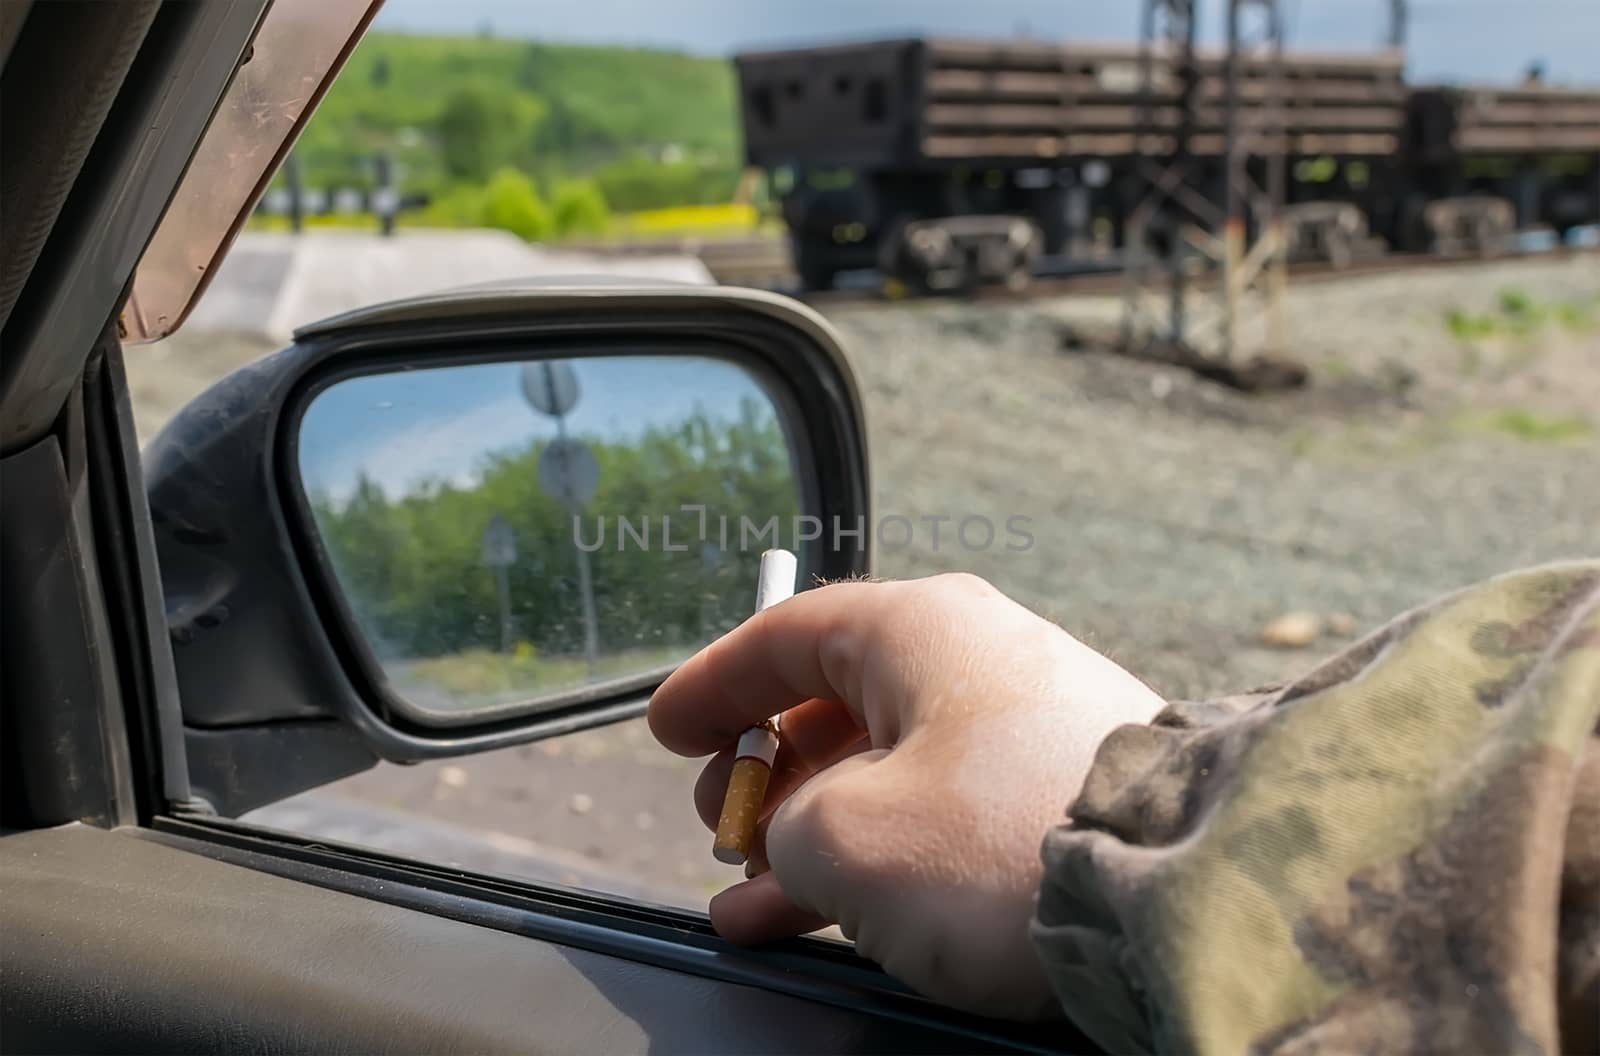 hand men, military, in camouflage clothing, holding a cigarette while in the car, which is near the railway crossing with freight cars